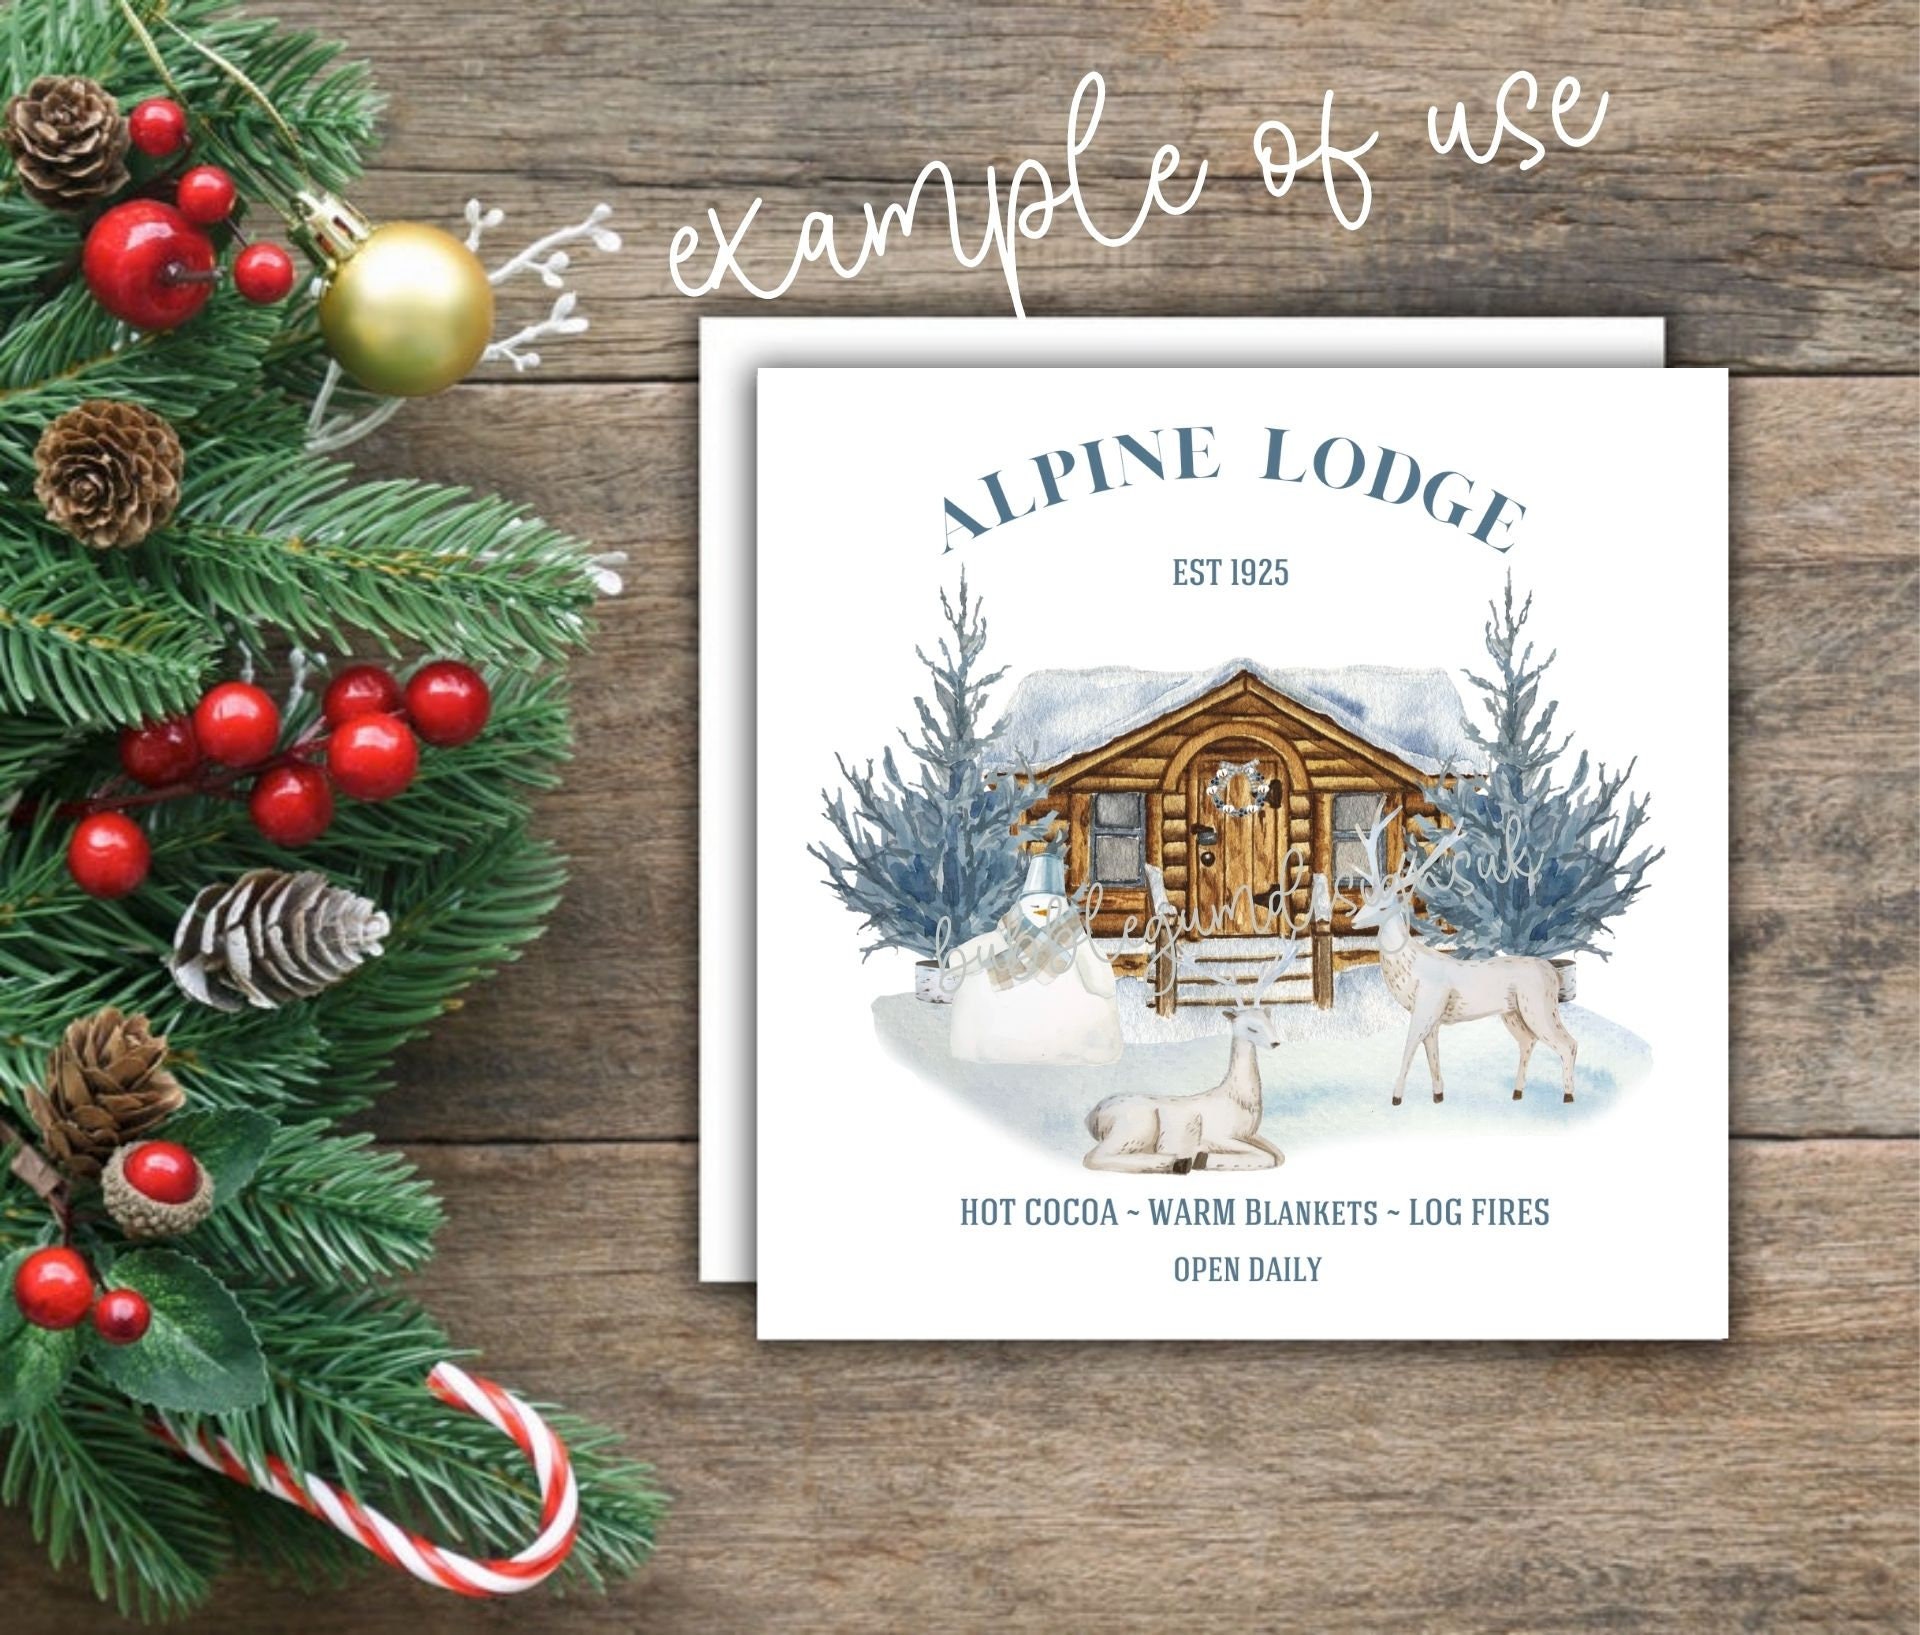 Alpine Lodge PNG, Snowy Christmas Lodge PNG, Rustic Holiday PNG,  Sublimation, Christmas Decor, Instant Digital Download 